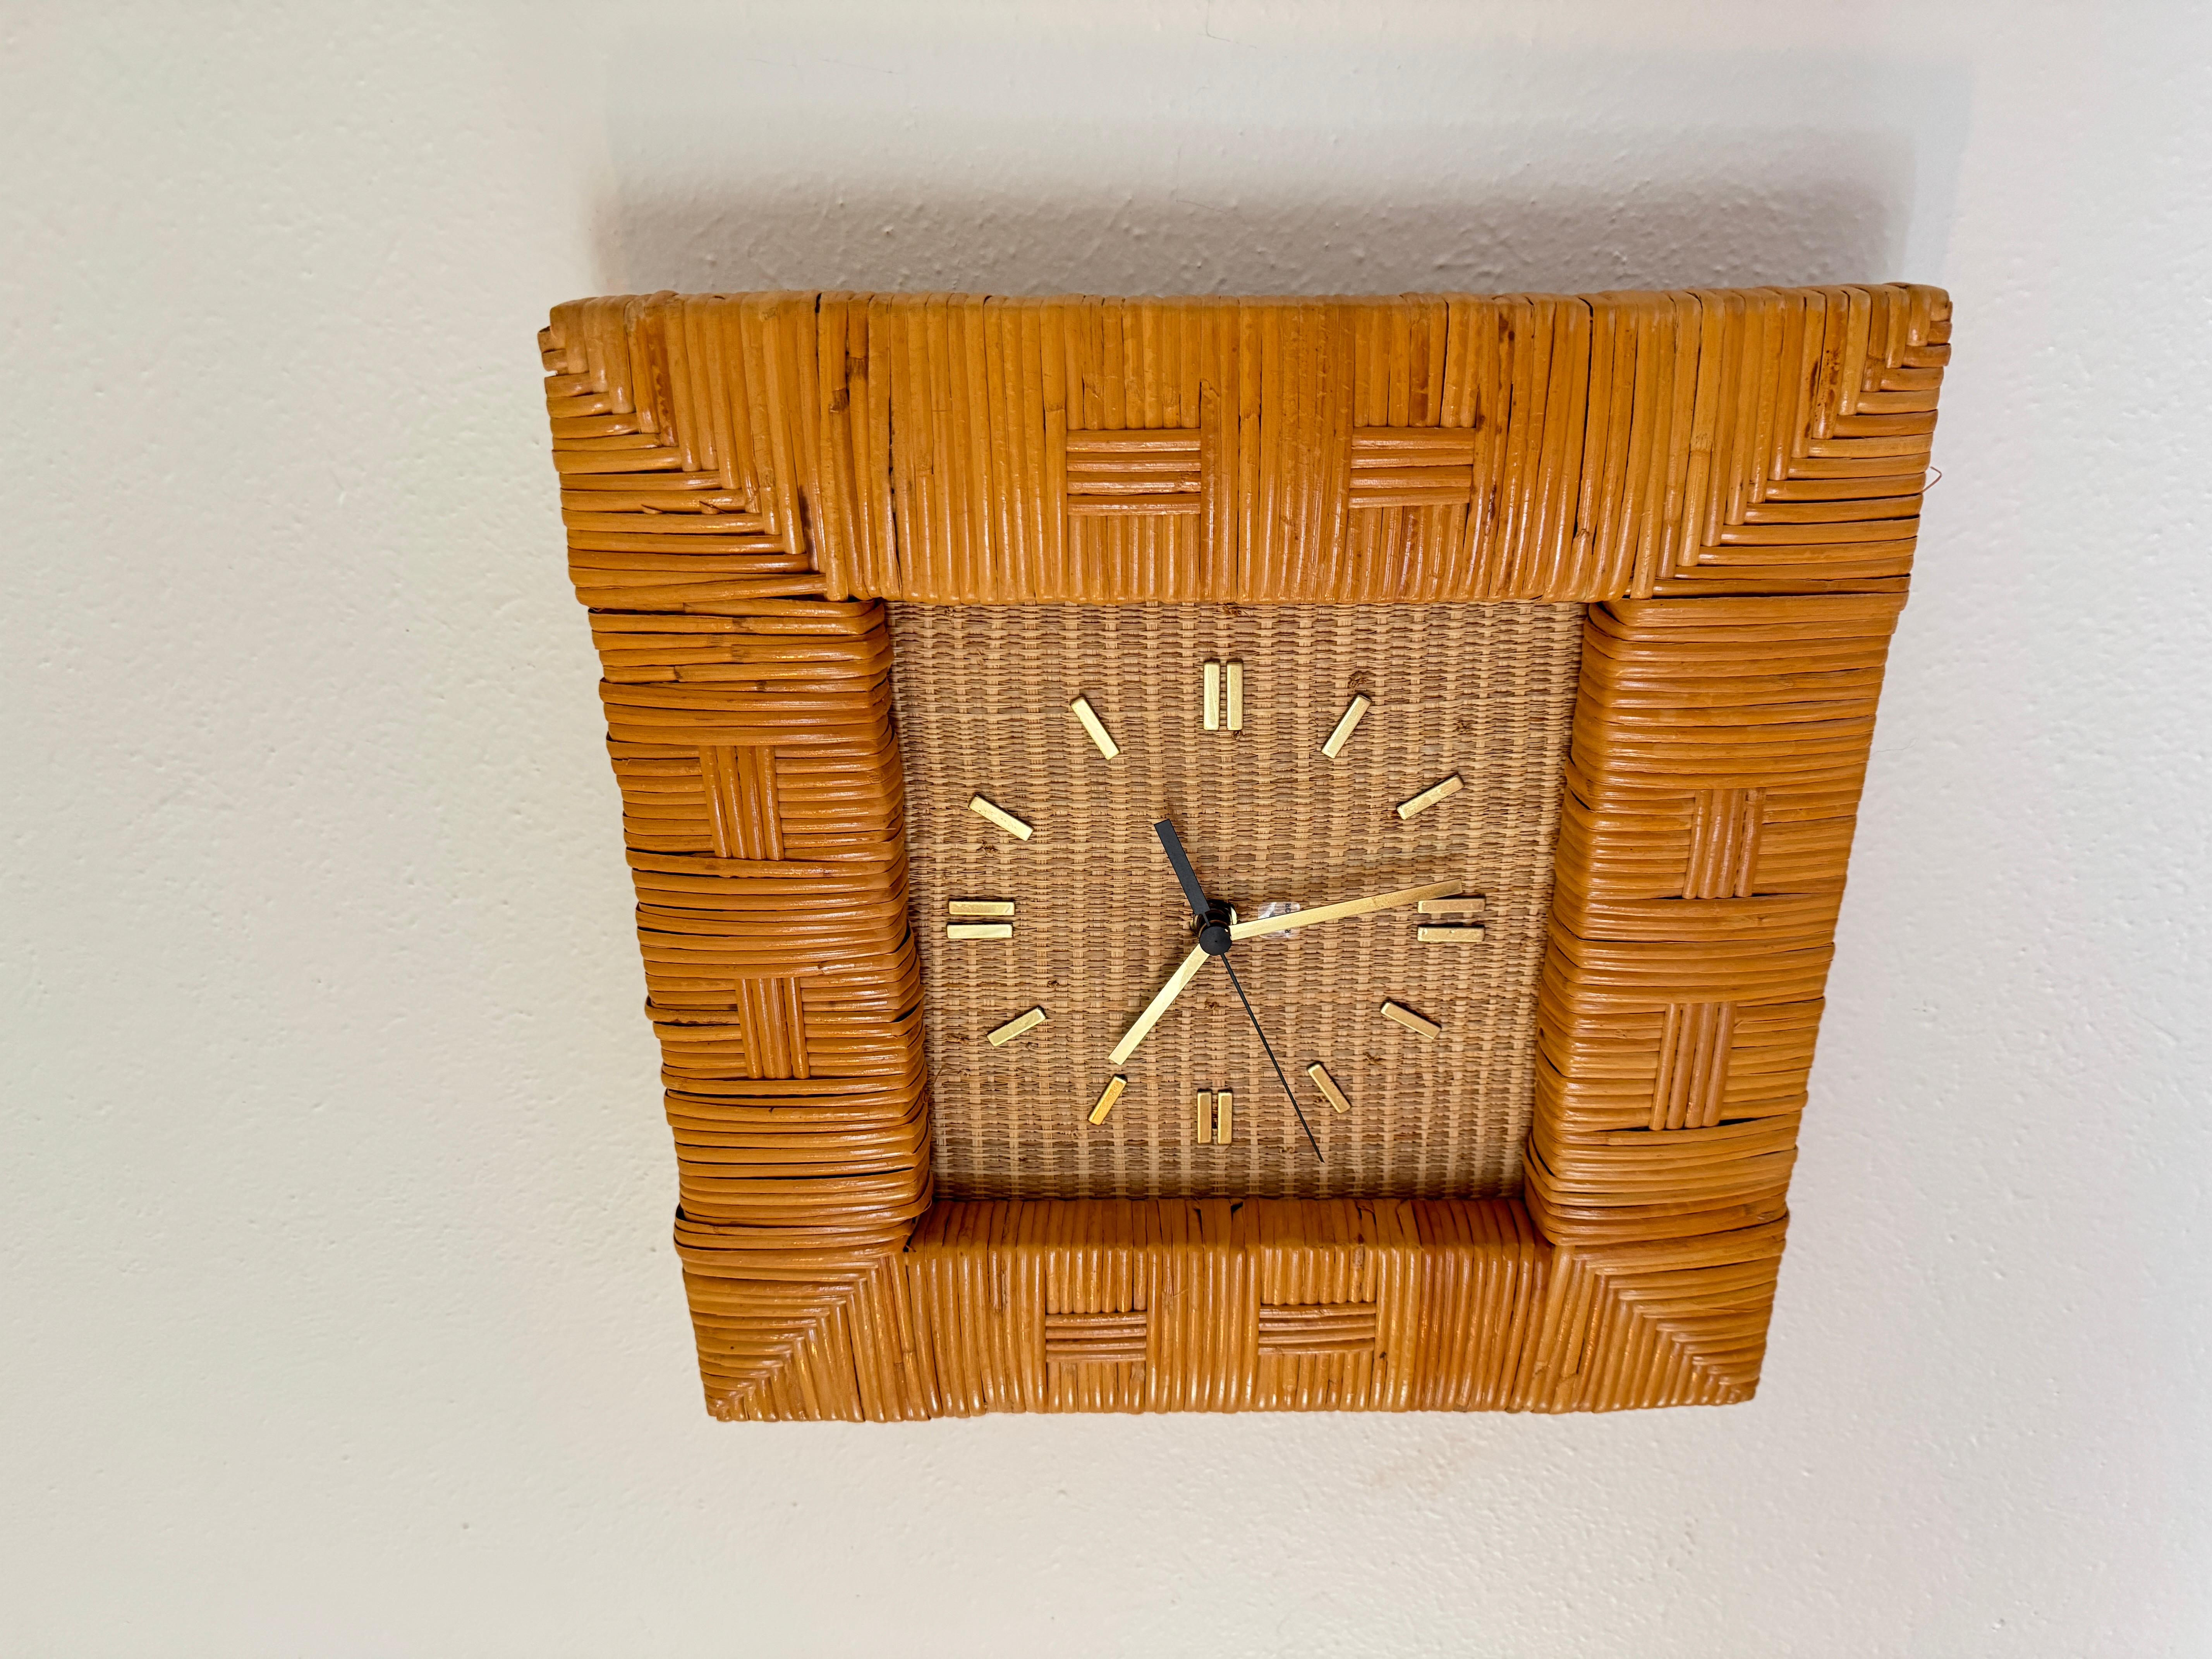 Mid century modern rattan wall clock by Raymor, circa 1960s. In great working order.

14x14